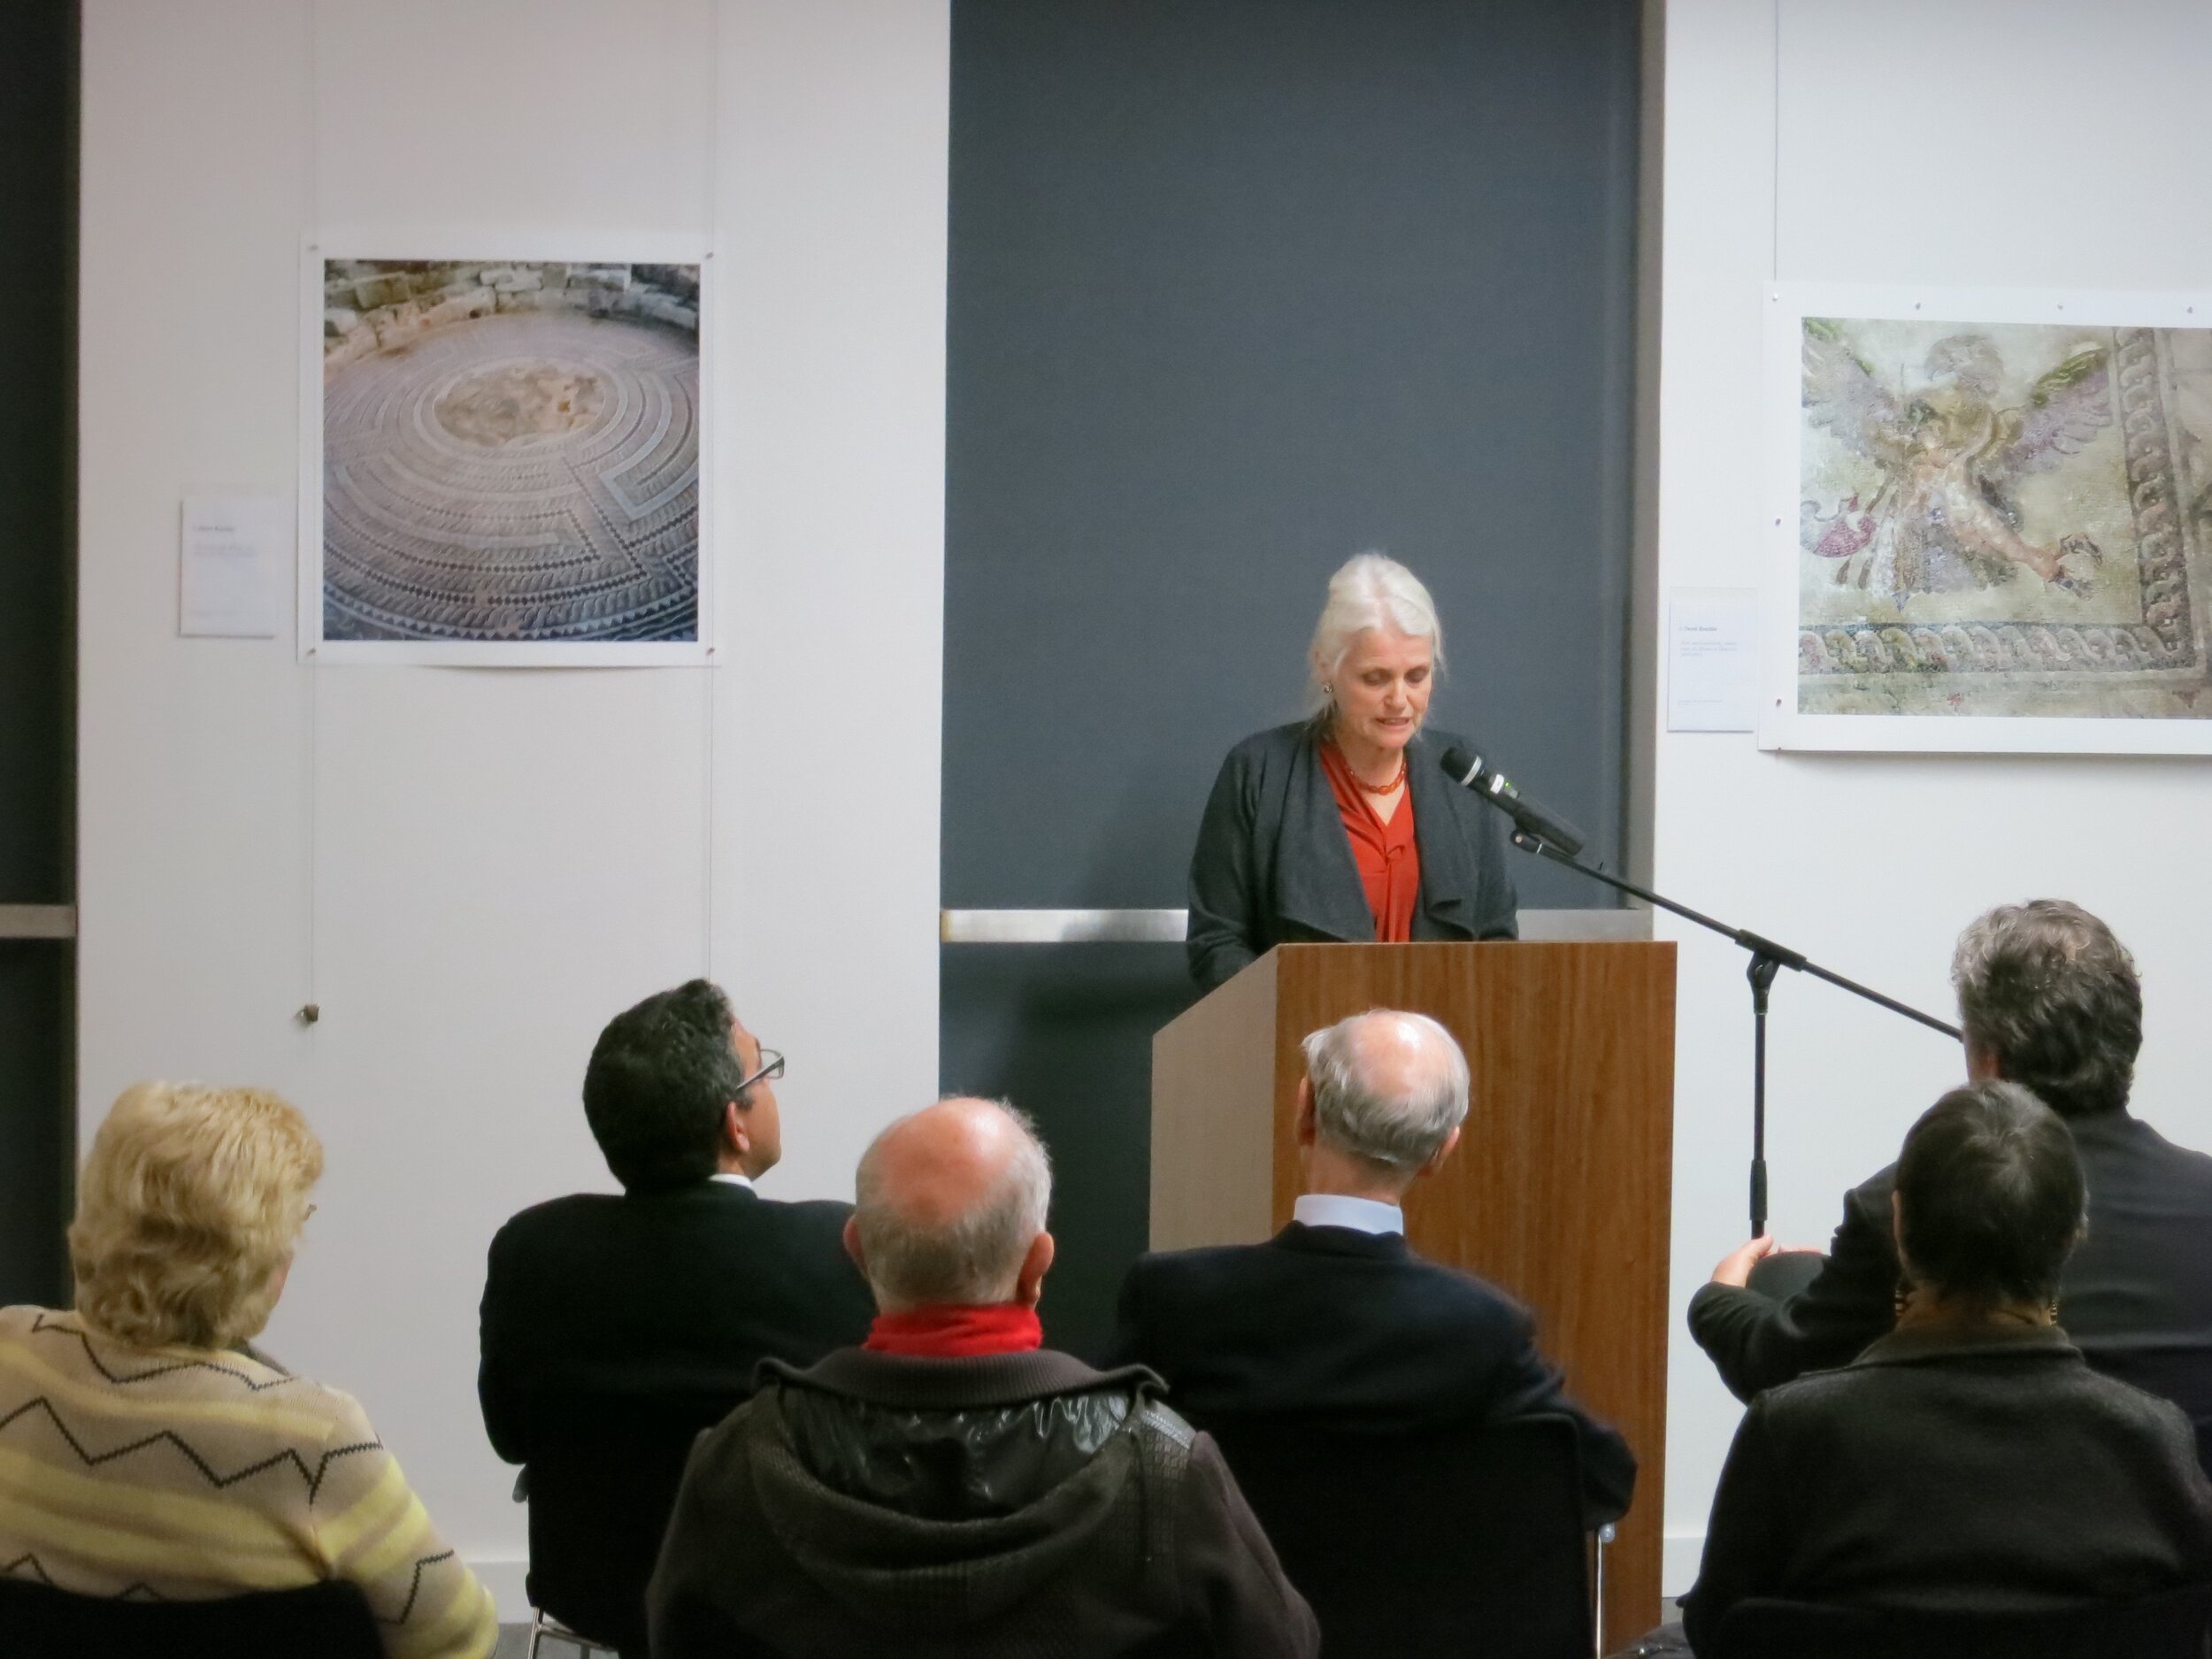  Prof. Diana Wood Conroy speaking at the opening of  Response to Cyprus,  10 July 2013. The event was hosted by the Australian Archaeological Institute at Athens (AAIA) at the Centre of Classical and Near Eastern Studies of Australia (CCANESA). Works